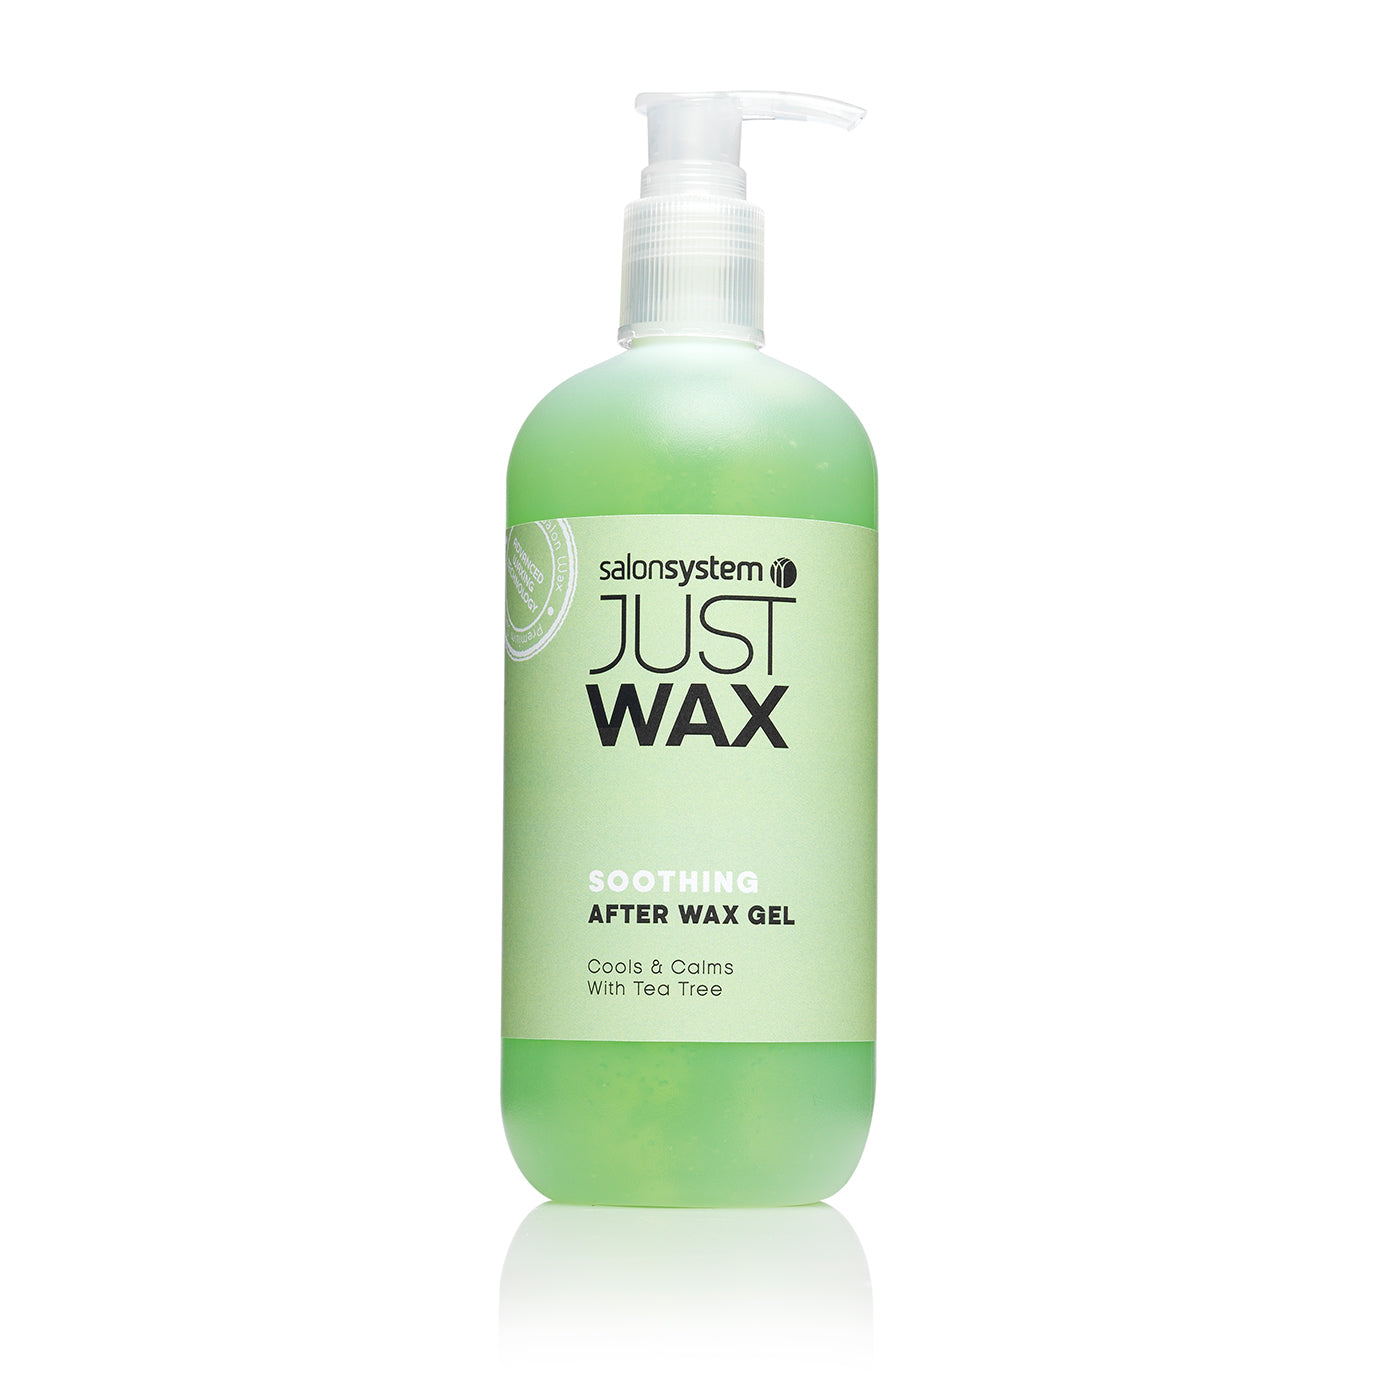 Just Wax Soothing After Wax Gel (500ml) - Ultimate Hair and Beauty